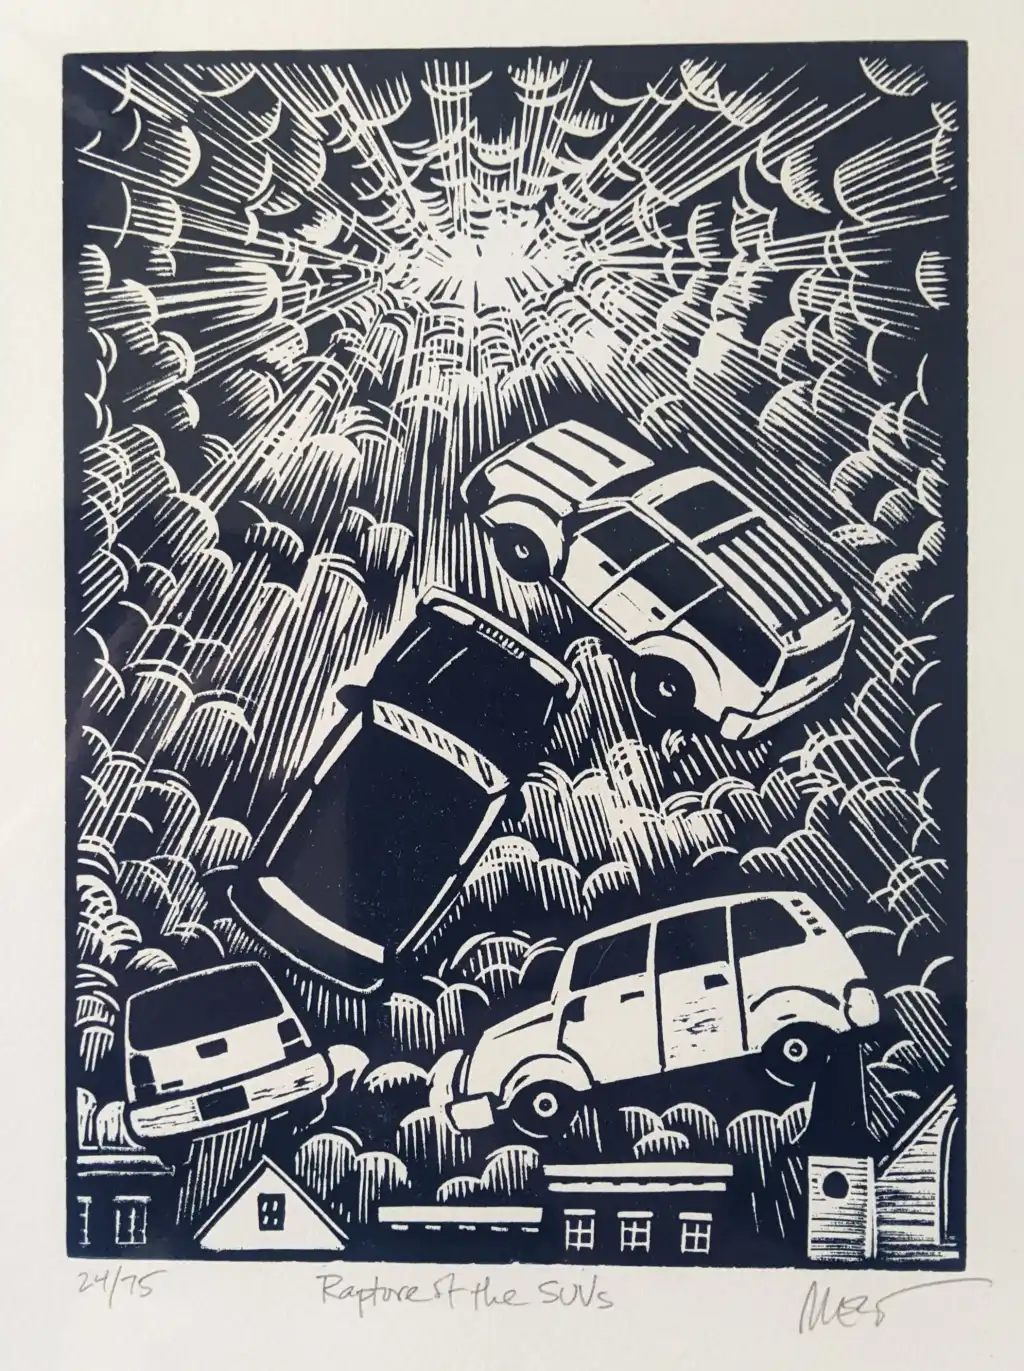 The Rapture of the SUVs, by Melissa West